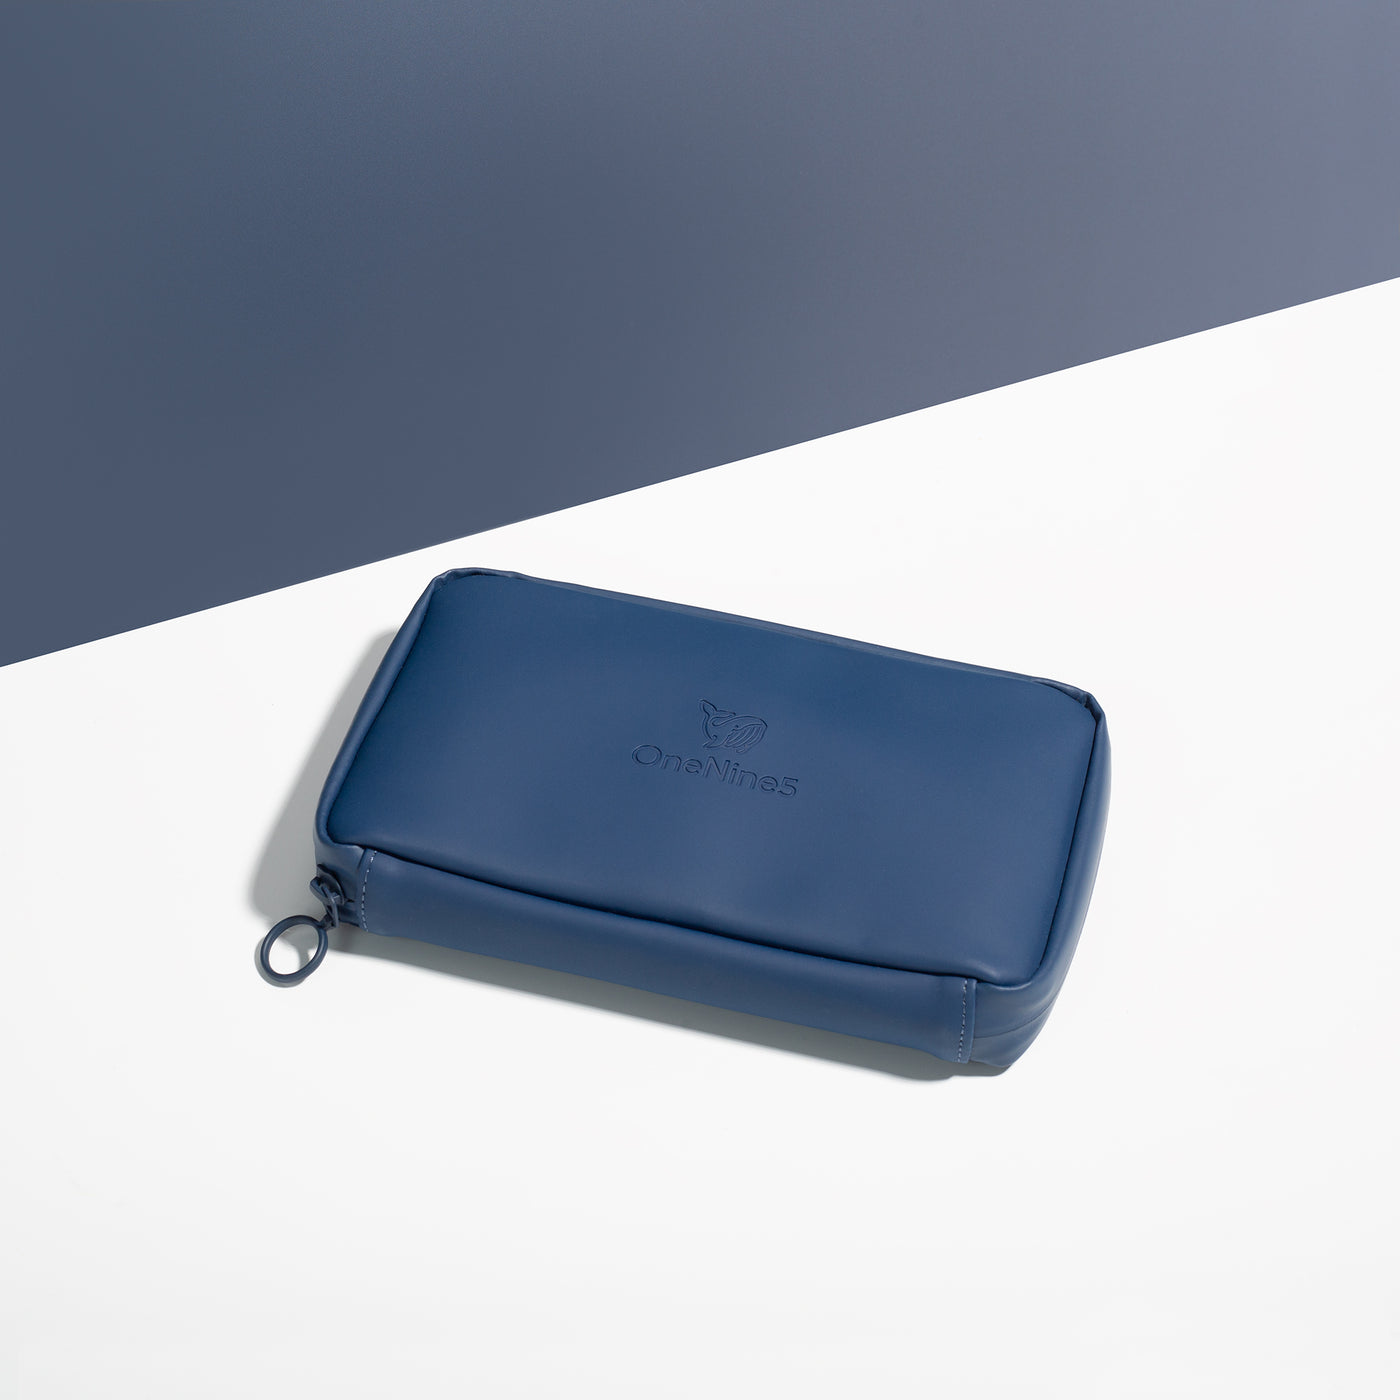 Havelock Blue Eco Essentials Pouch zipped closed and laid flat on a white surface, with a blue background behind. The angle of the image show’s the underside of the pouch. In the foreground, the metal O-ring zipper puller is visible on the left corner of the pouch.